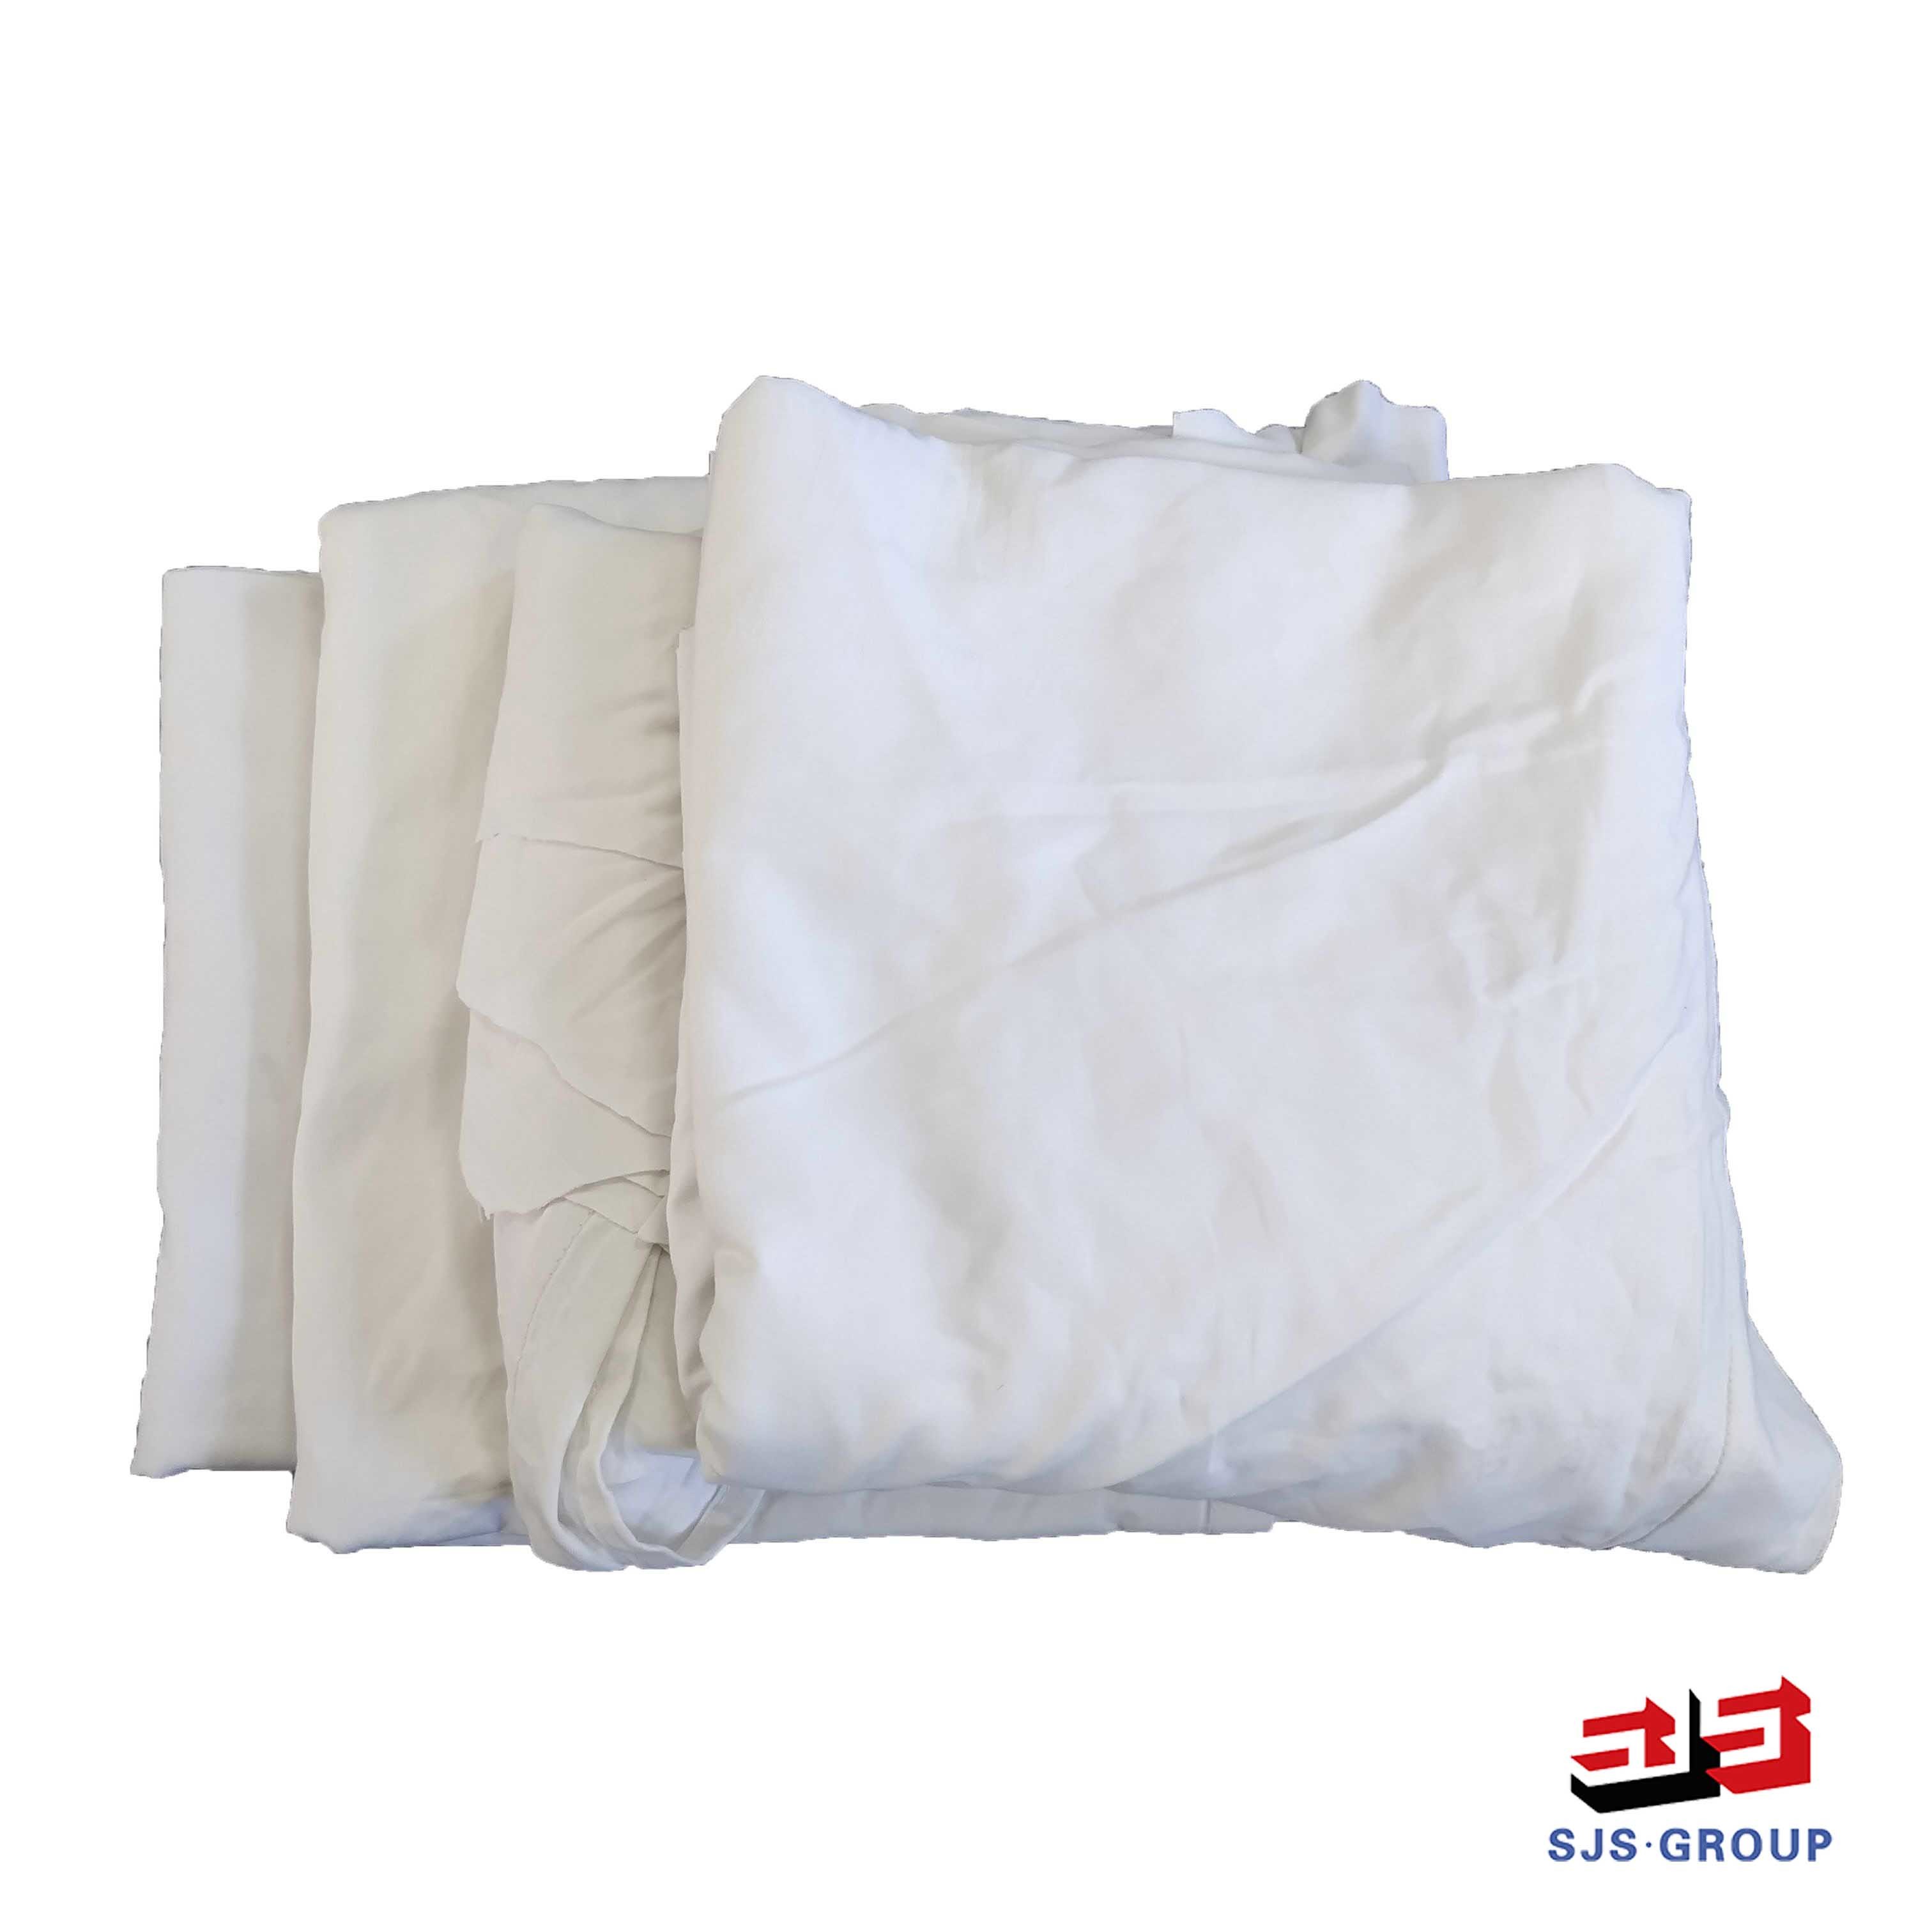 50-100Cm 20kg/Bale White Cotton Wiping Rags